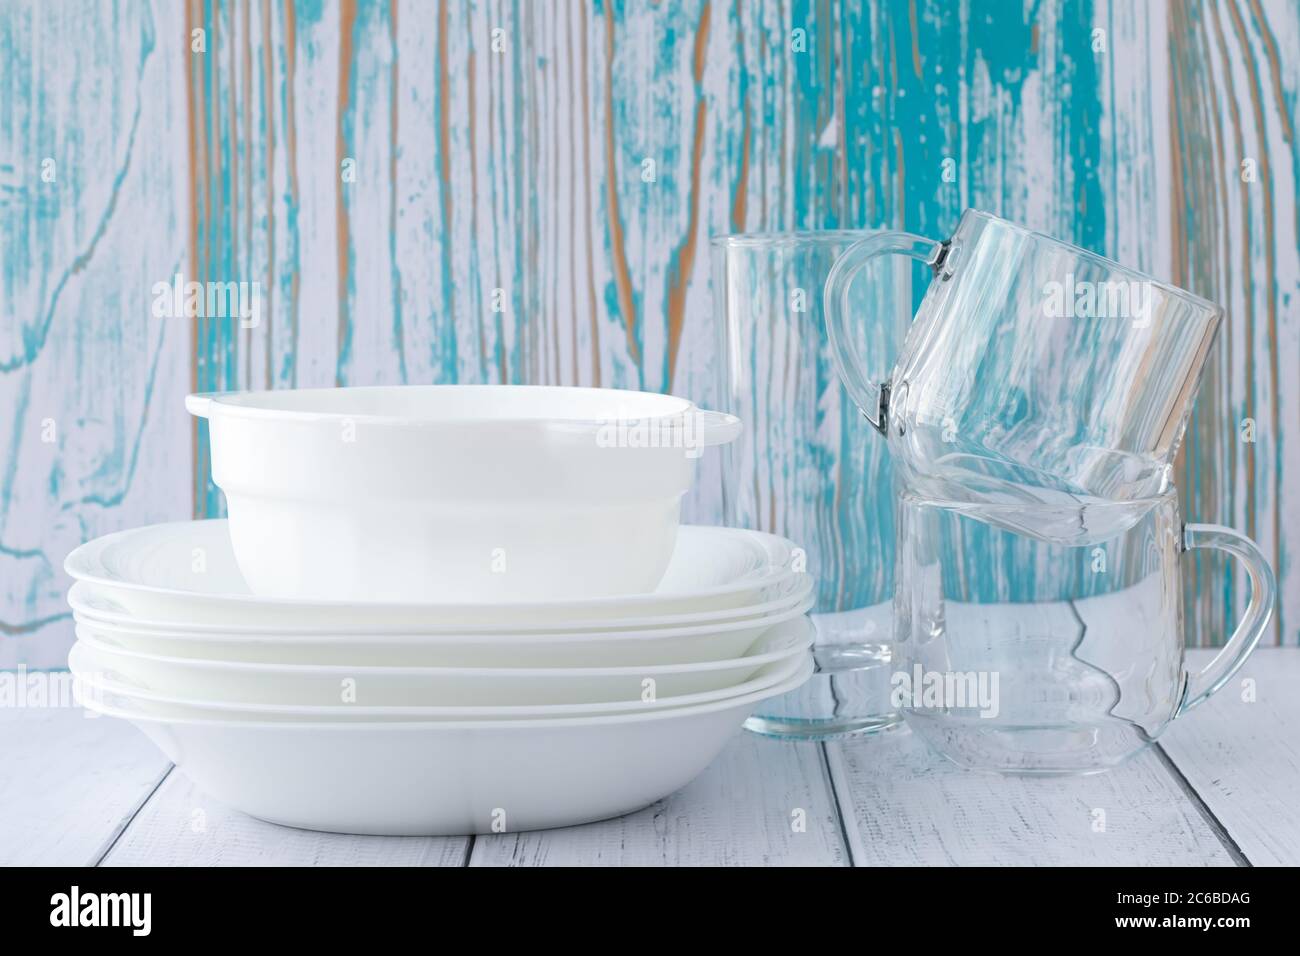 White bowls, glasses and plates on the table. Stack of clean dishes on a blue wooden background Stock Photo